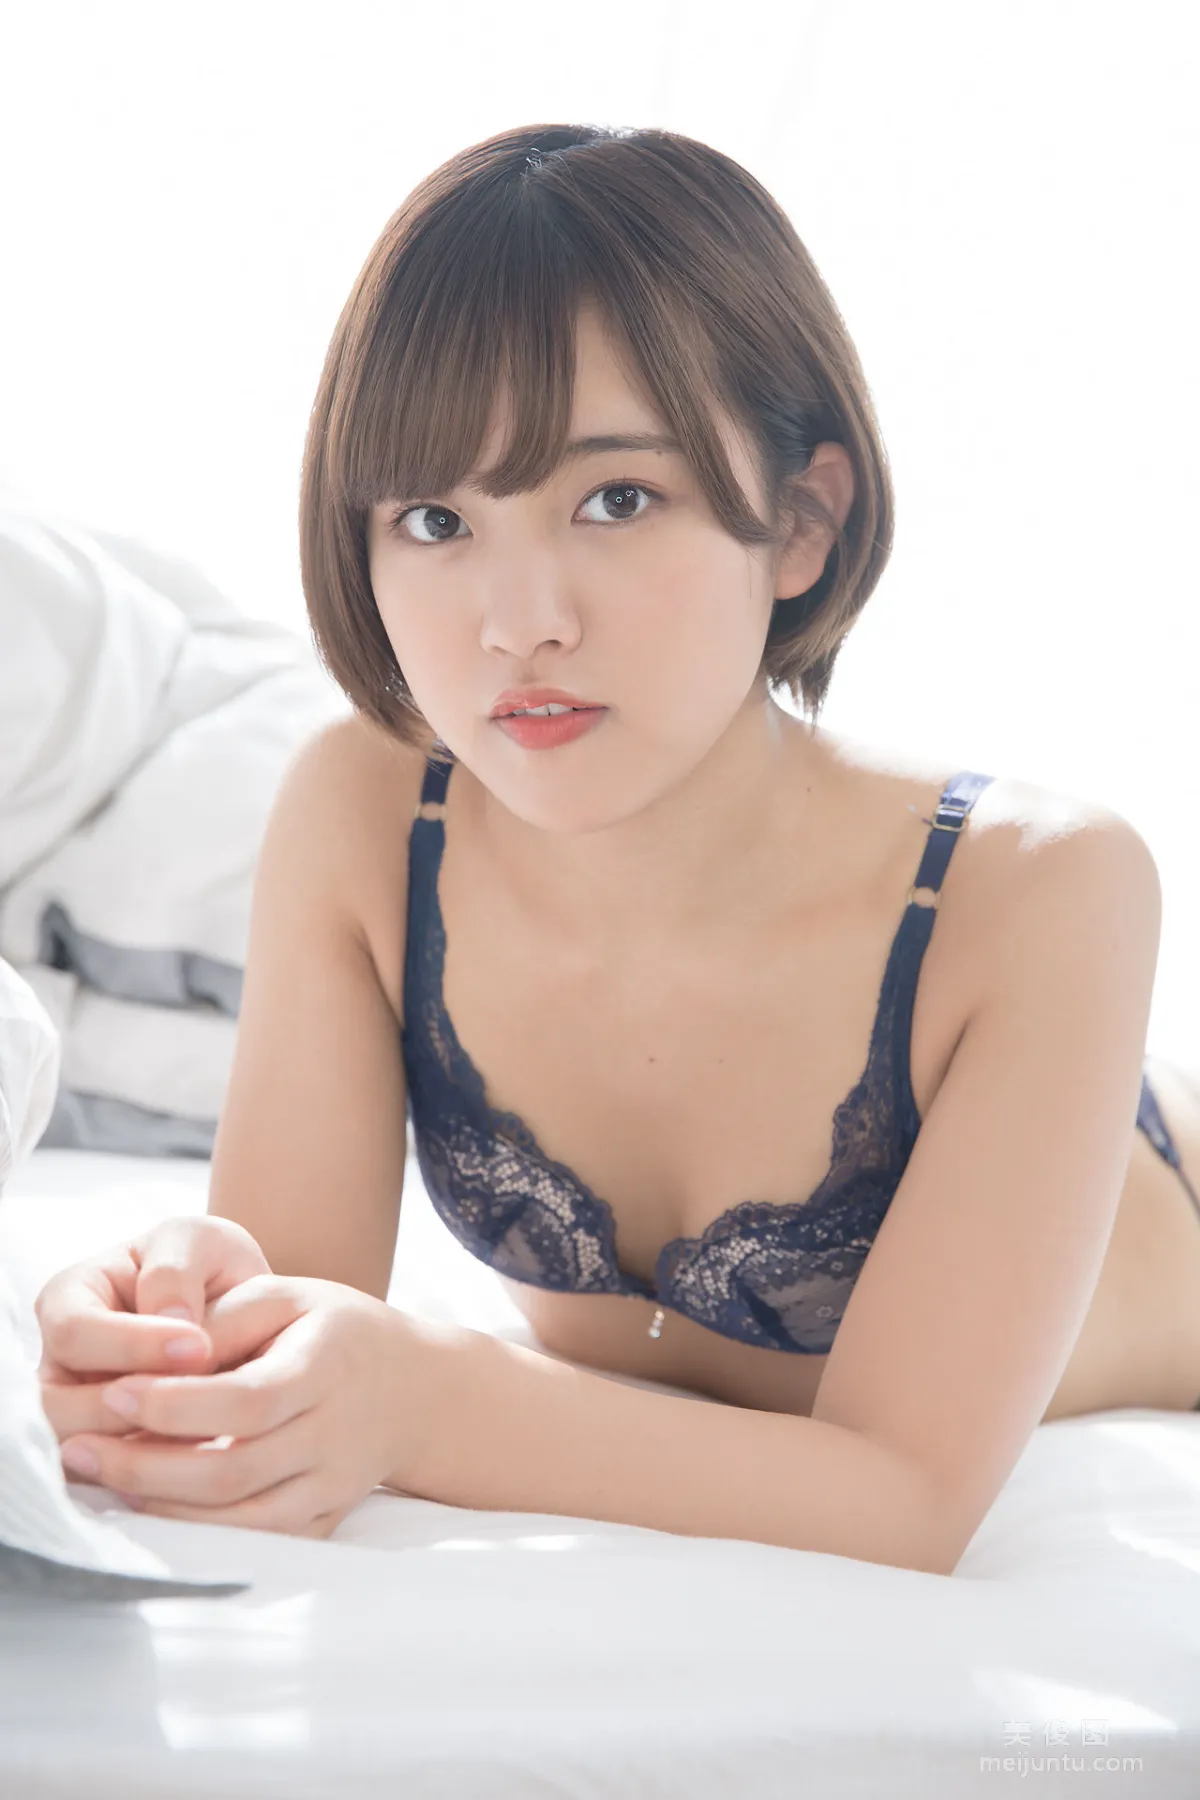 [Minisuka.tv] 香月りお - Limited Gallery 18.3+18.468